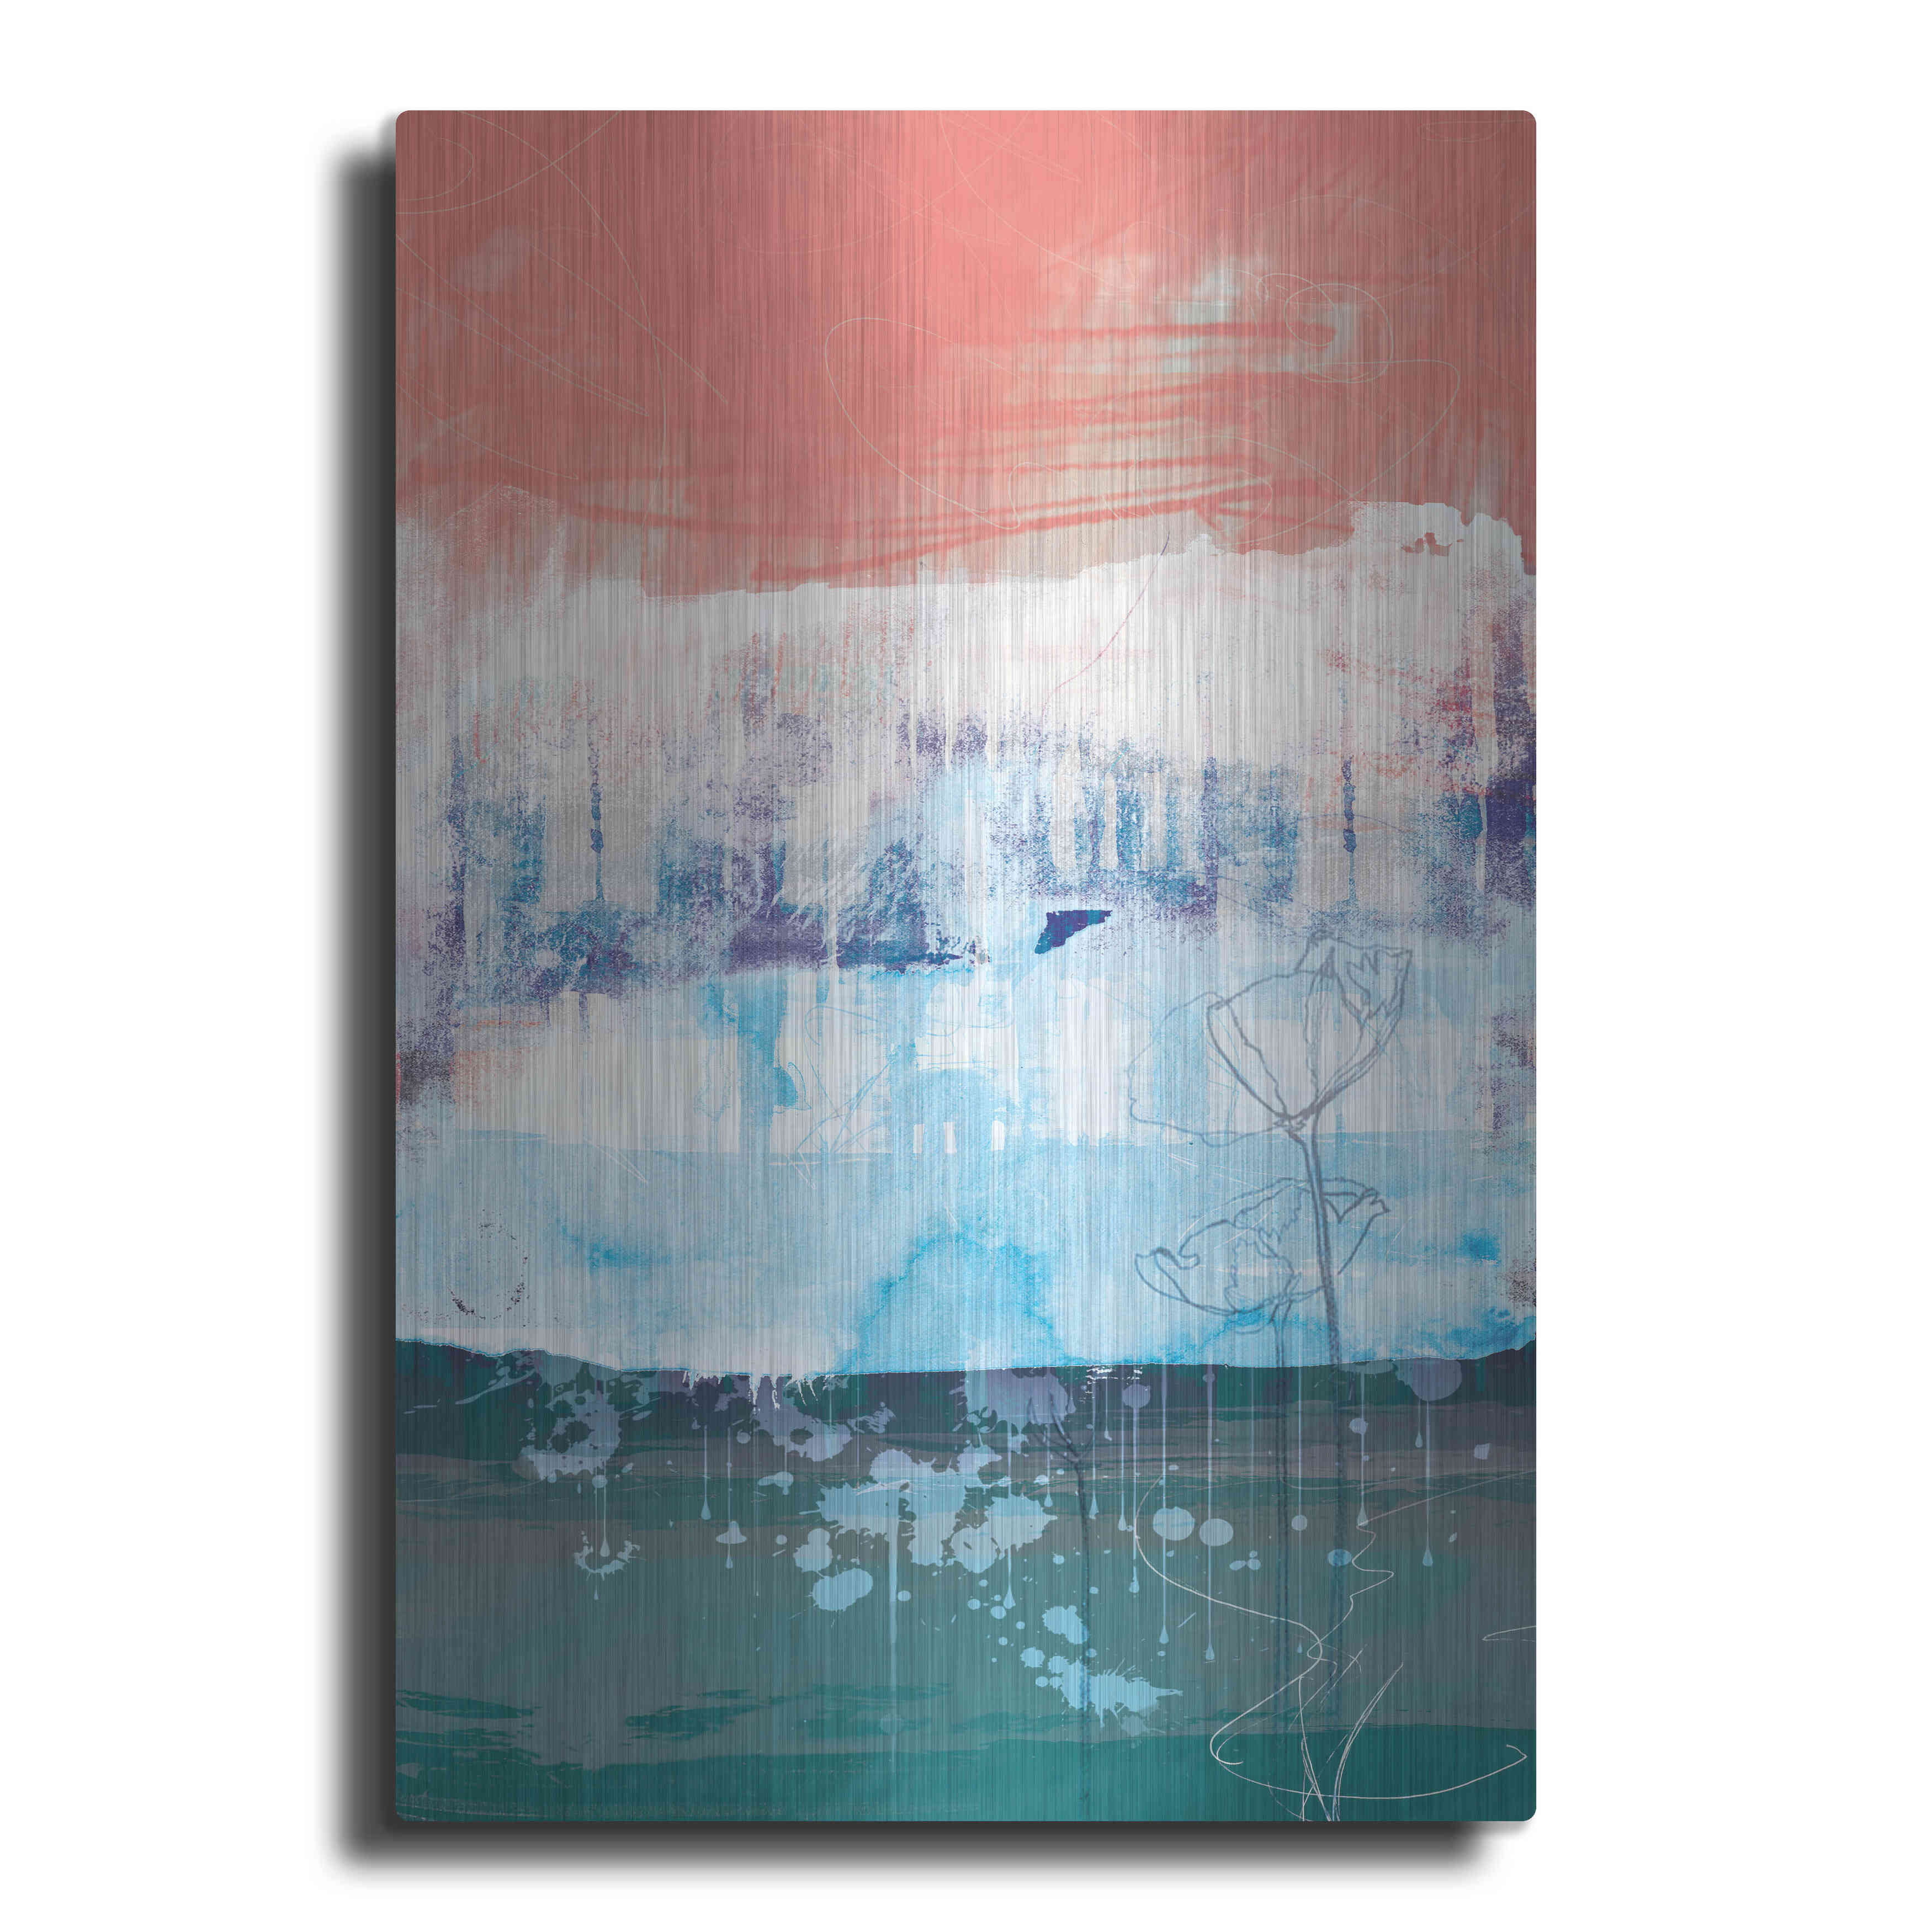 Original work Abstract wall decoration with hearts Vertical canvas format 20x16 inches Valentine's Day gift.